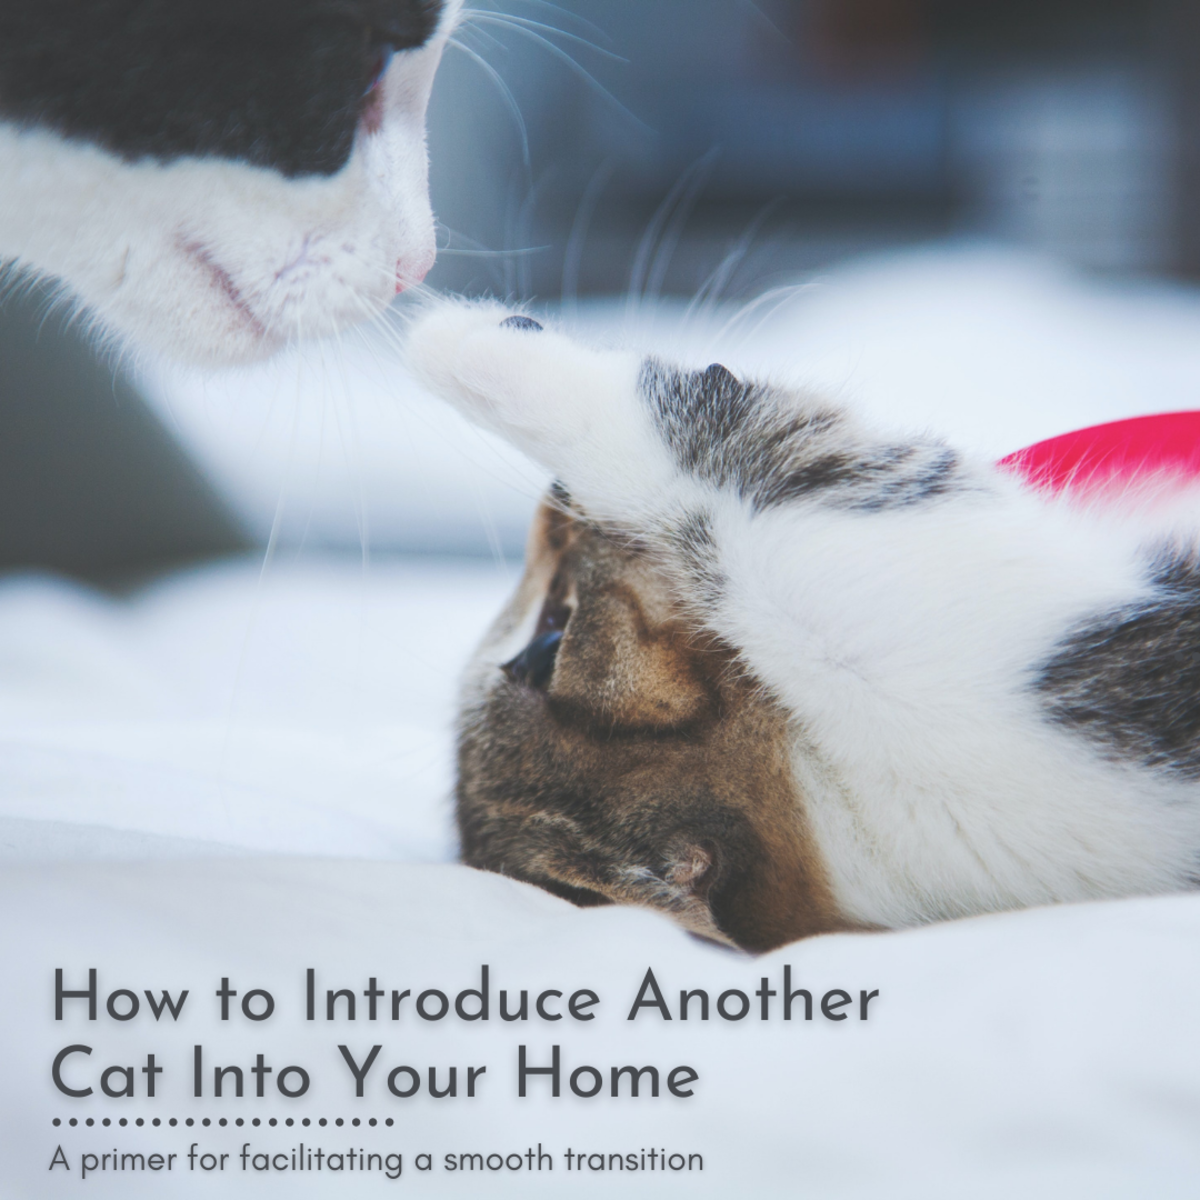 This article will provide some tips on how to introduce another cat into your home without upsetting your current feline friends.